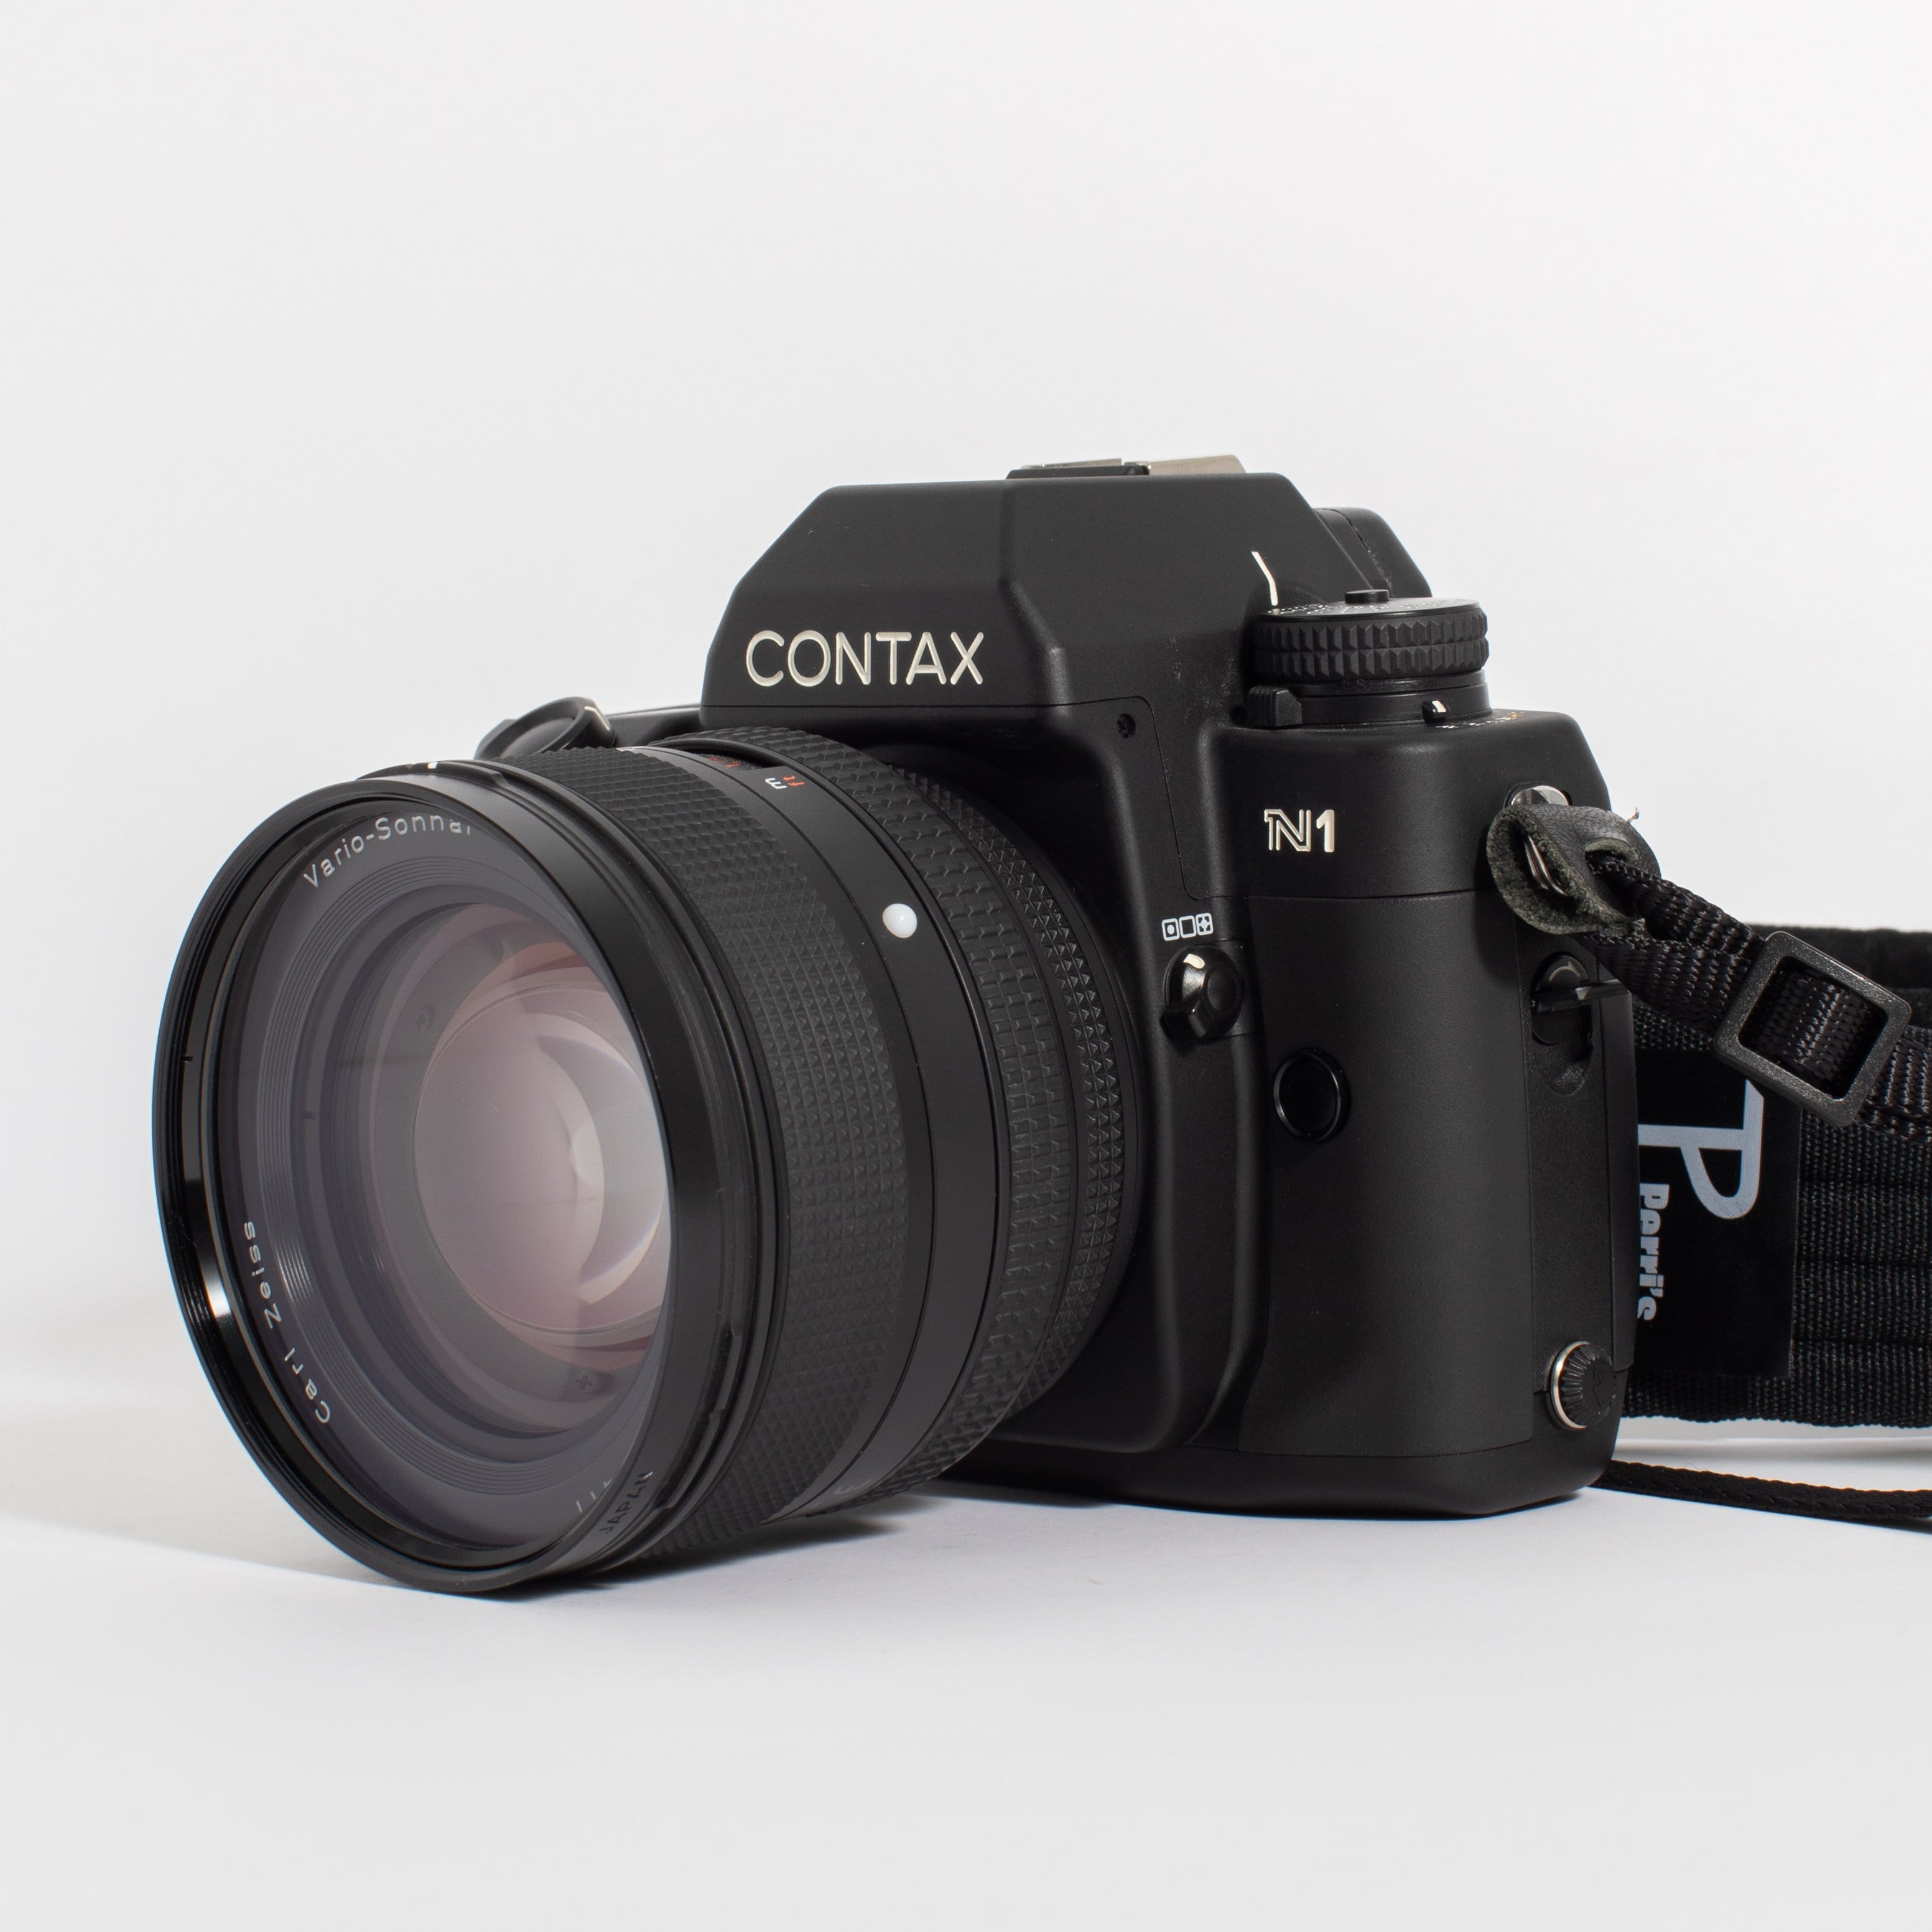 Contax N1 with Zeiss 24-85mm f/3.5-4.5 Lens and Flash – Film